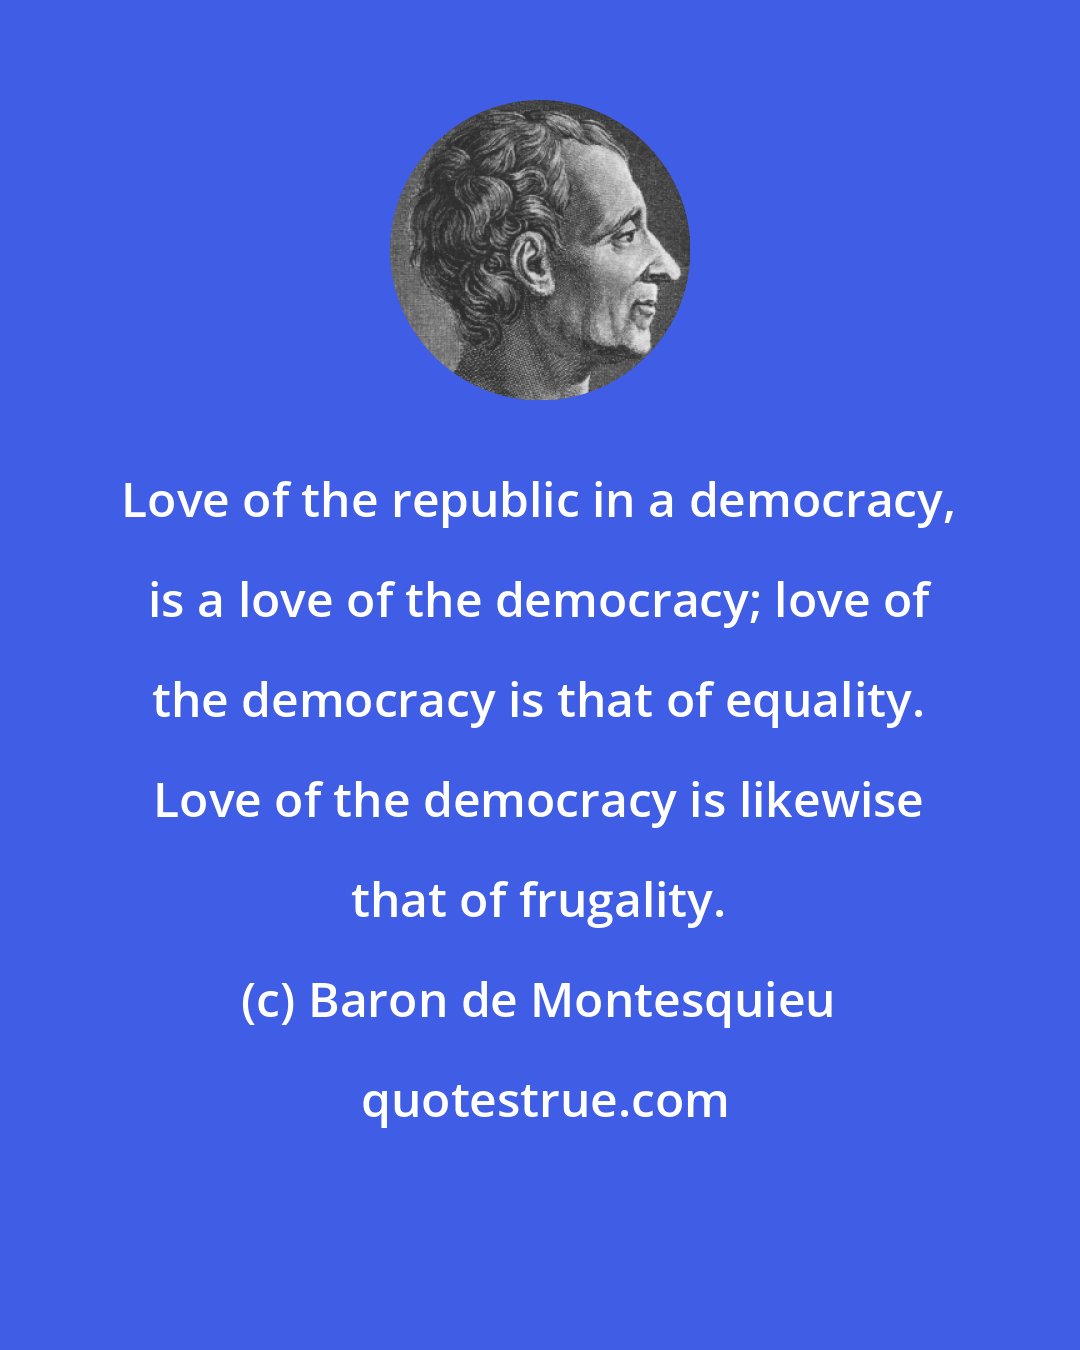 Baron de Montesquieu: Love of the republic in a democracy, is a love of the democracy; love of the democracy is that of equality. Love of the democracy is likewise that of frugality.